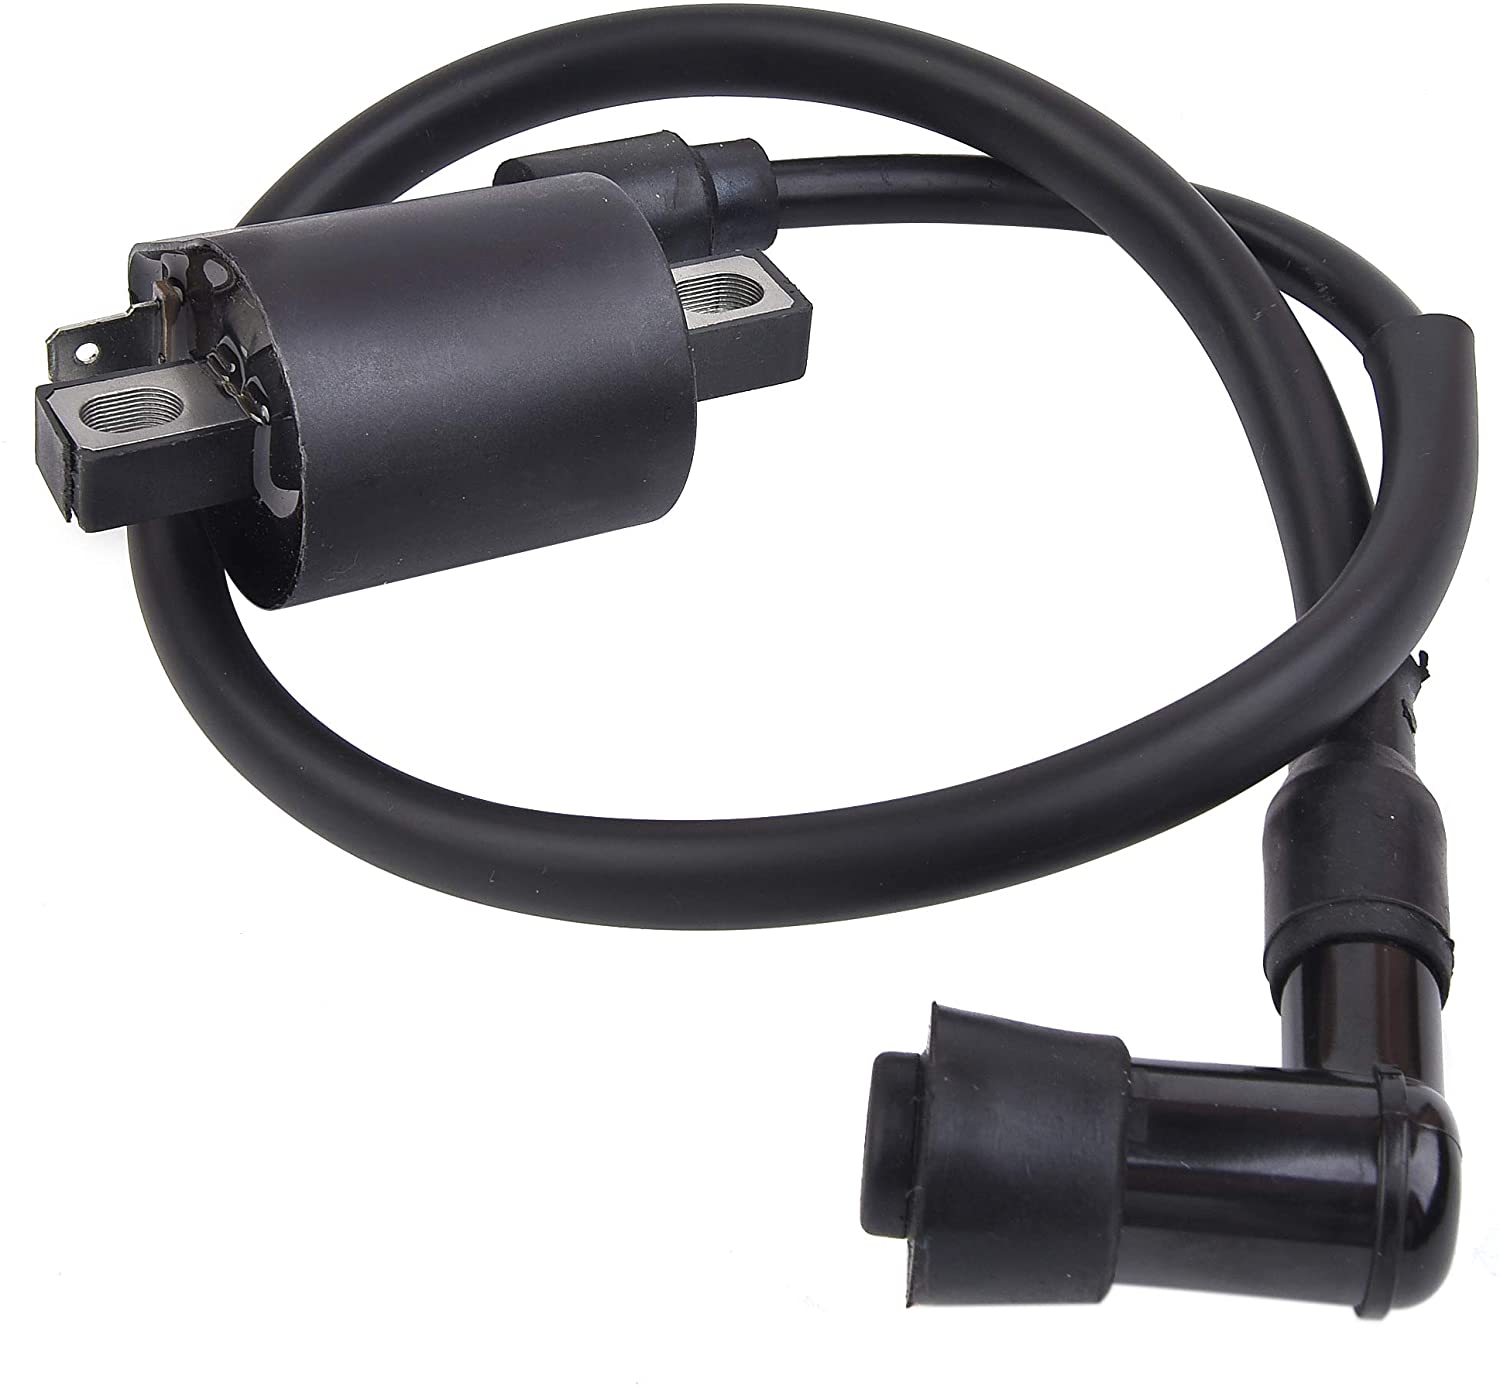 Ignition Coil Replacement for PW50/PW80 1981-2009